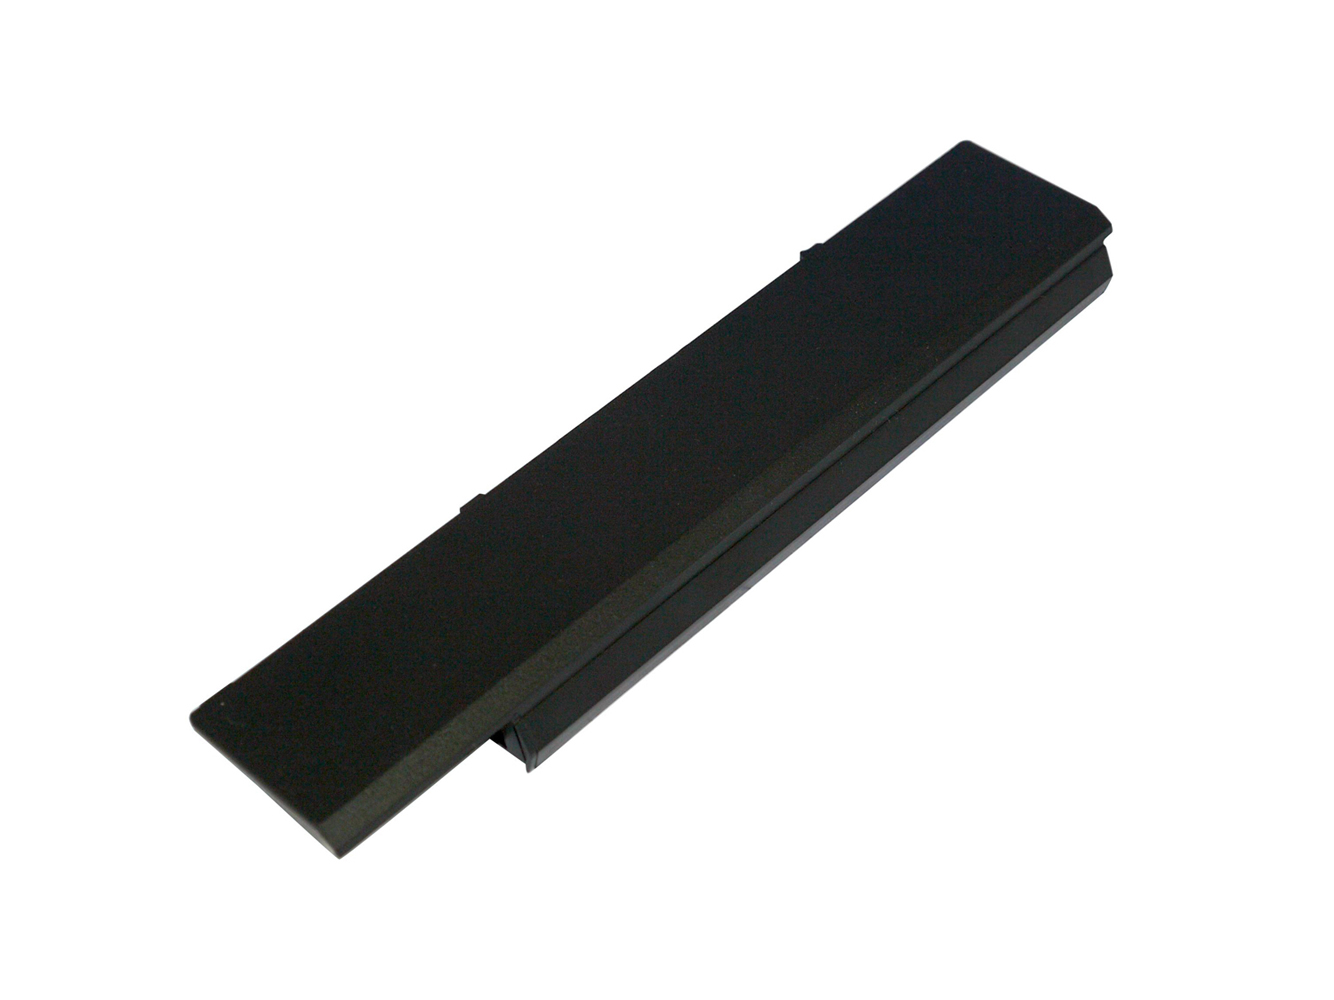 Replacement for Dell Vostro 3400, Vostro 3500, Vostro 3700 Laptop Battery